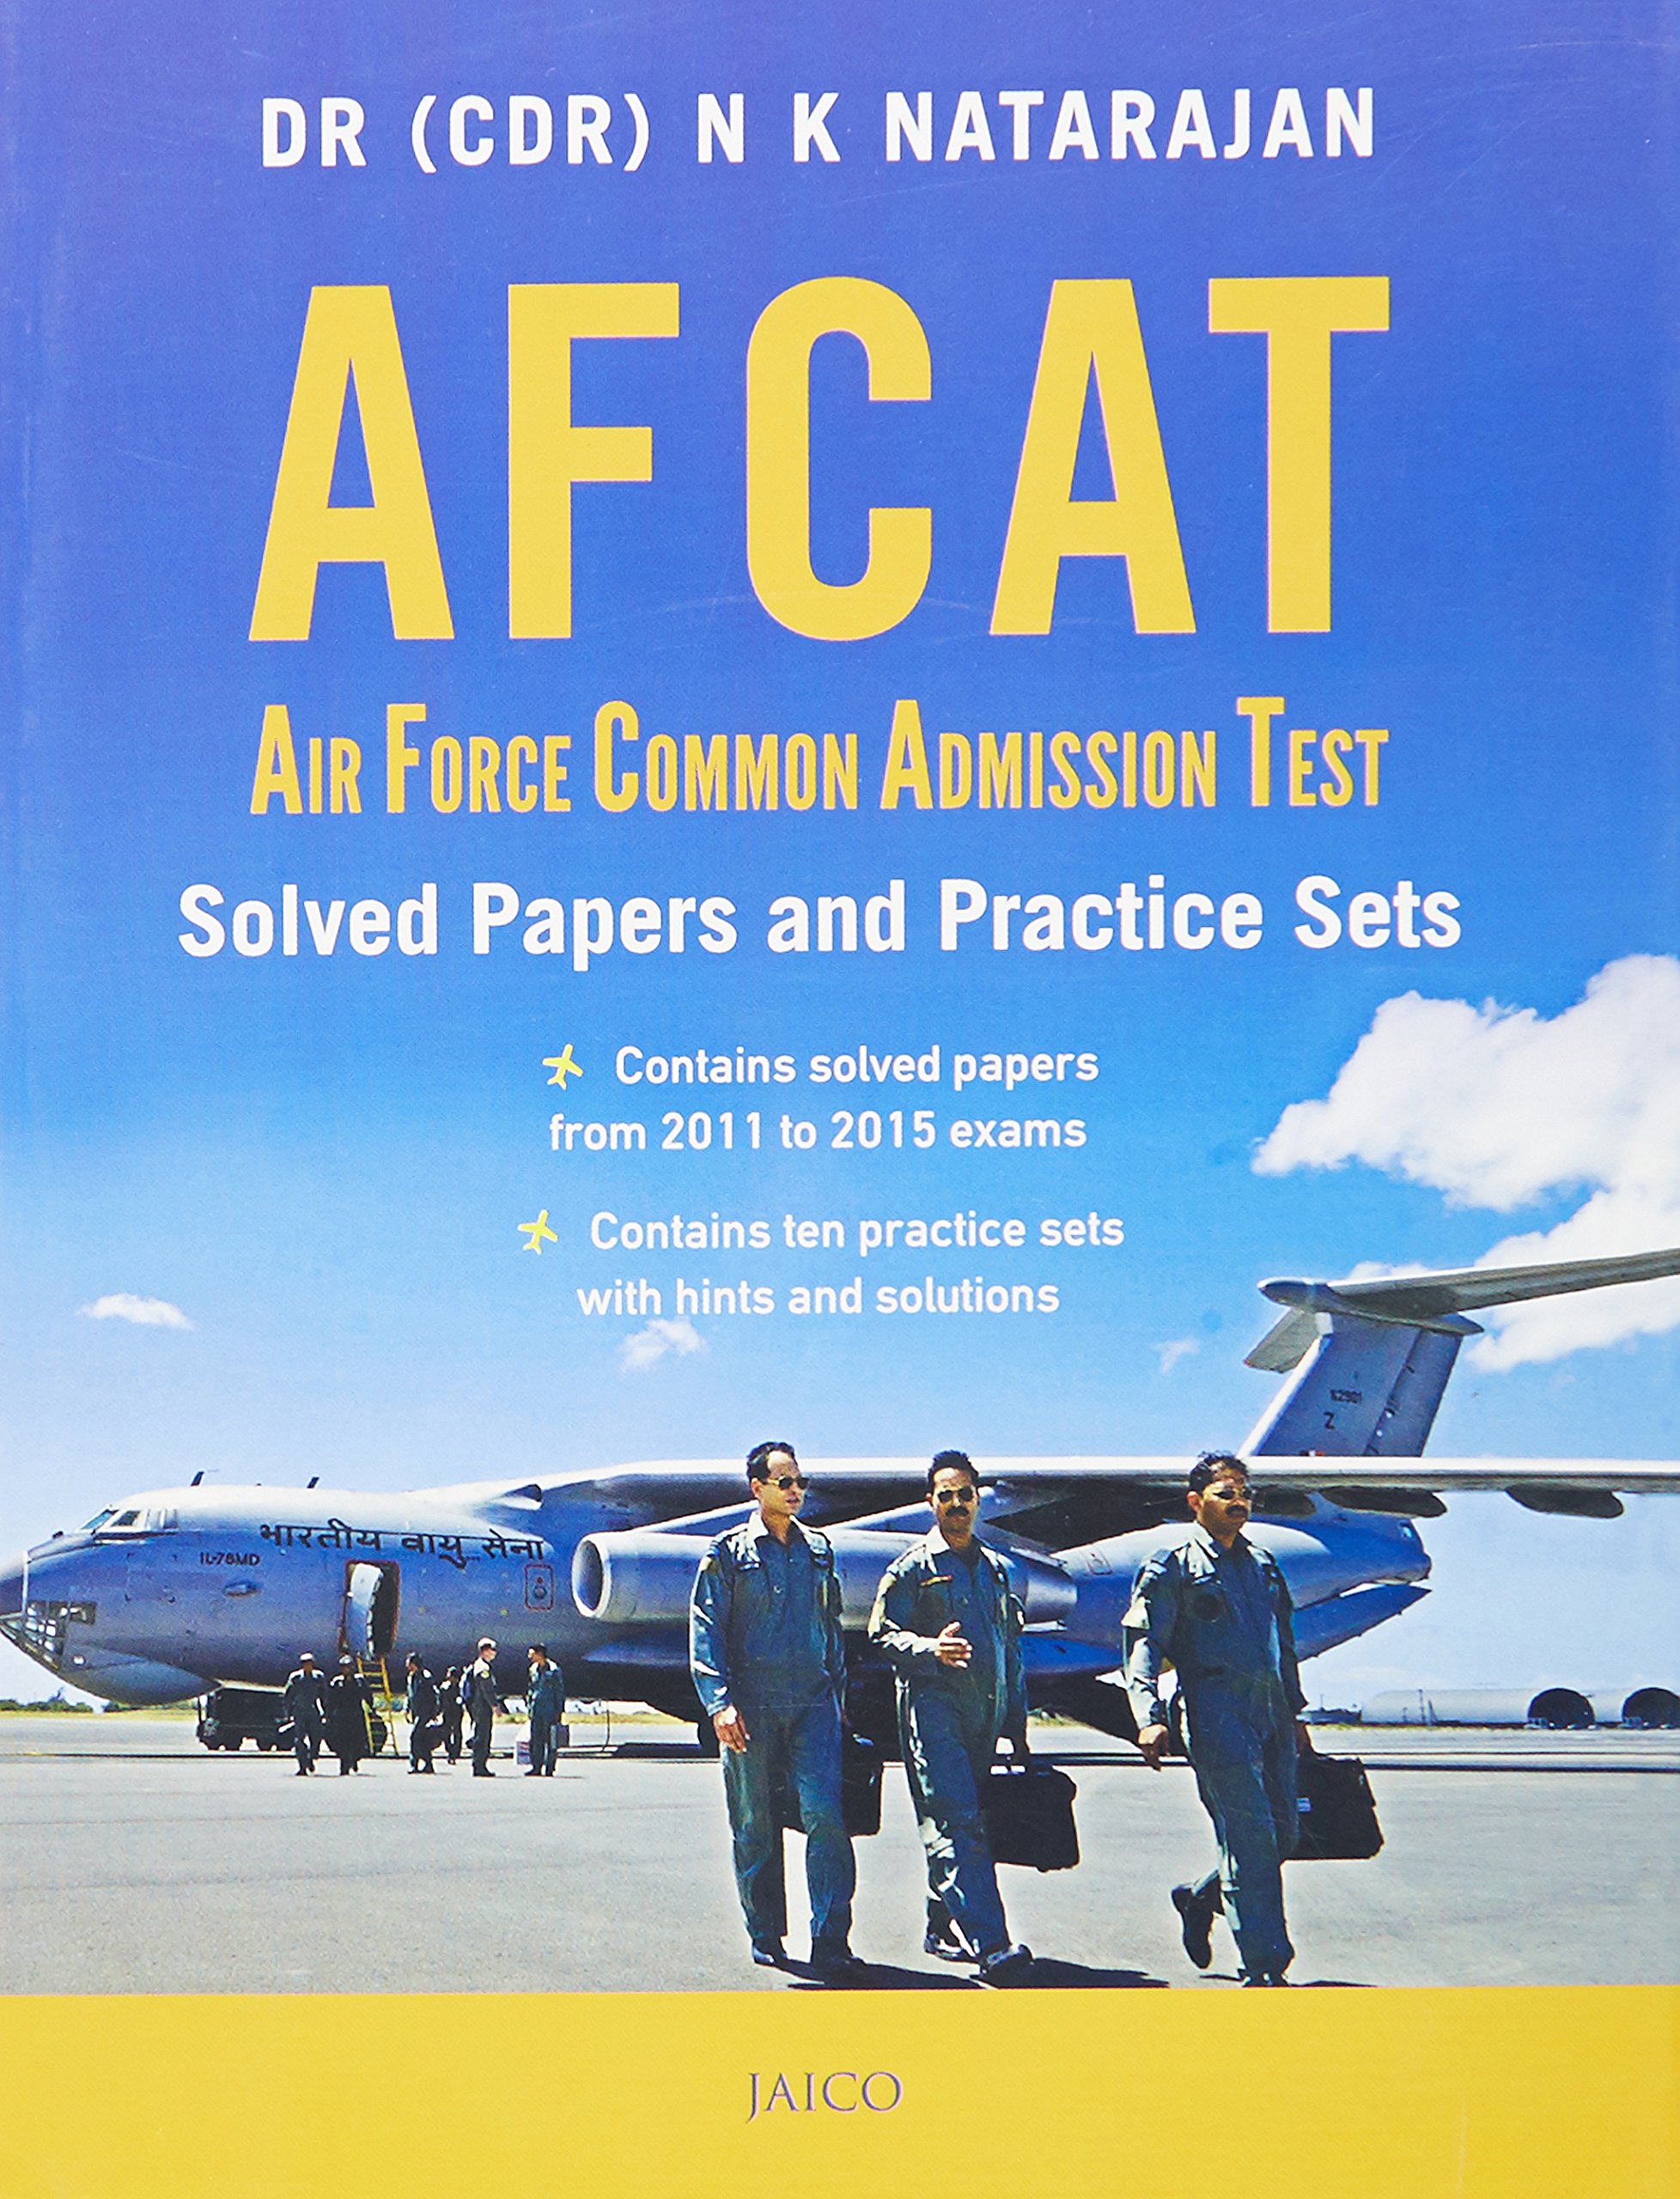 afcat-air-force-common-admission-test-solved-papers-and-practice-sets